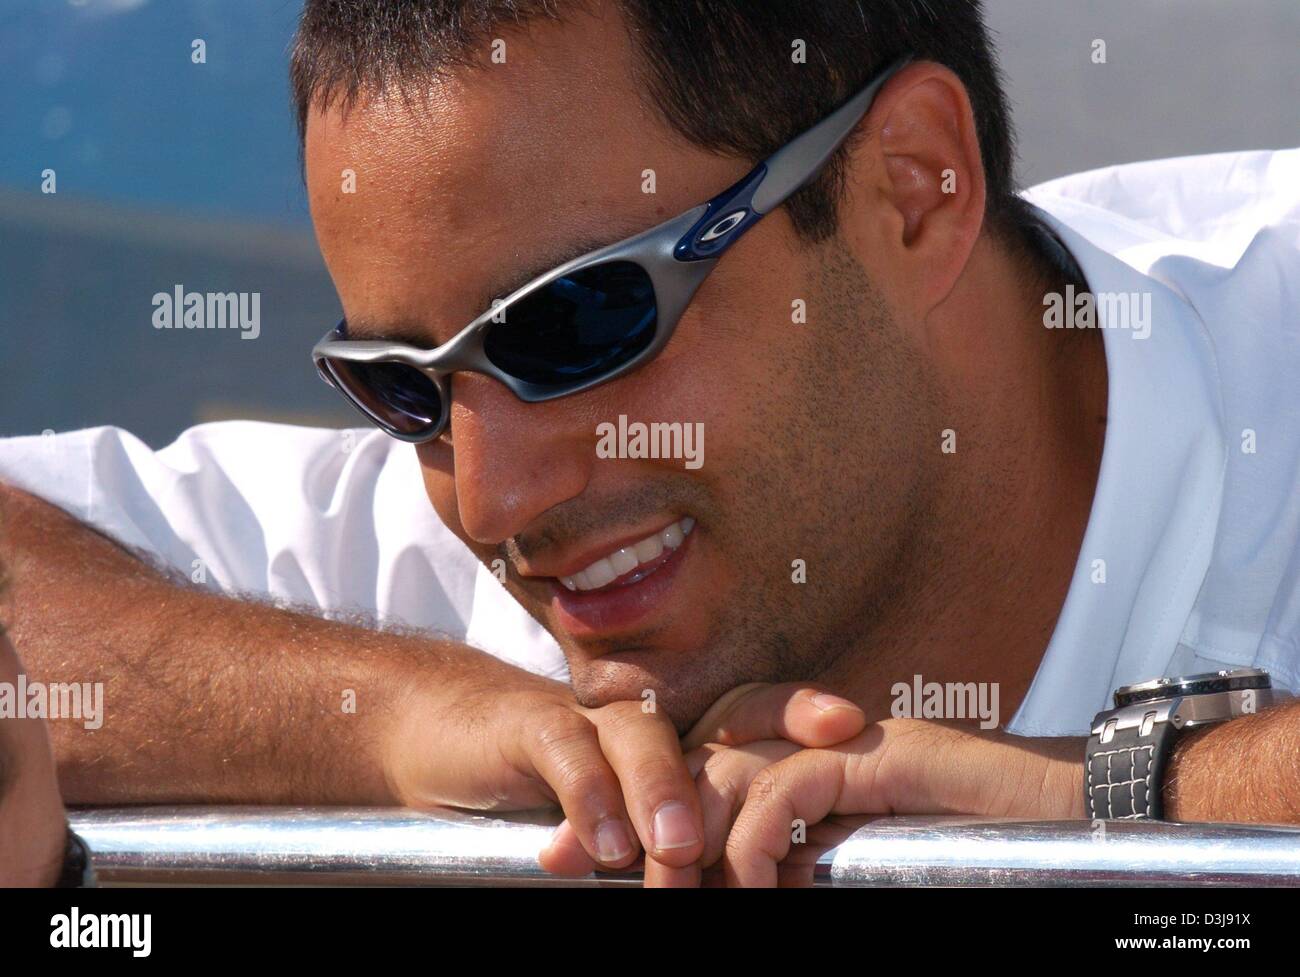 (dpa) - Colombian formula one pilot Juan Pablo Montoya (BMW-Williams) smiles as he leans on a metal bar at the driver's camp on the 'Enzo et Dino Ferrari' formula one circuit in Imola, Italy, 22 April 2004. The San Marino grand prix, which is the fourth race leading up to the 2004 formula one world championship, is going to start on Sunday, 25 April 2004. Stock Photo